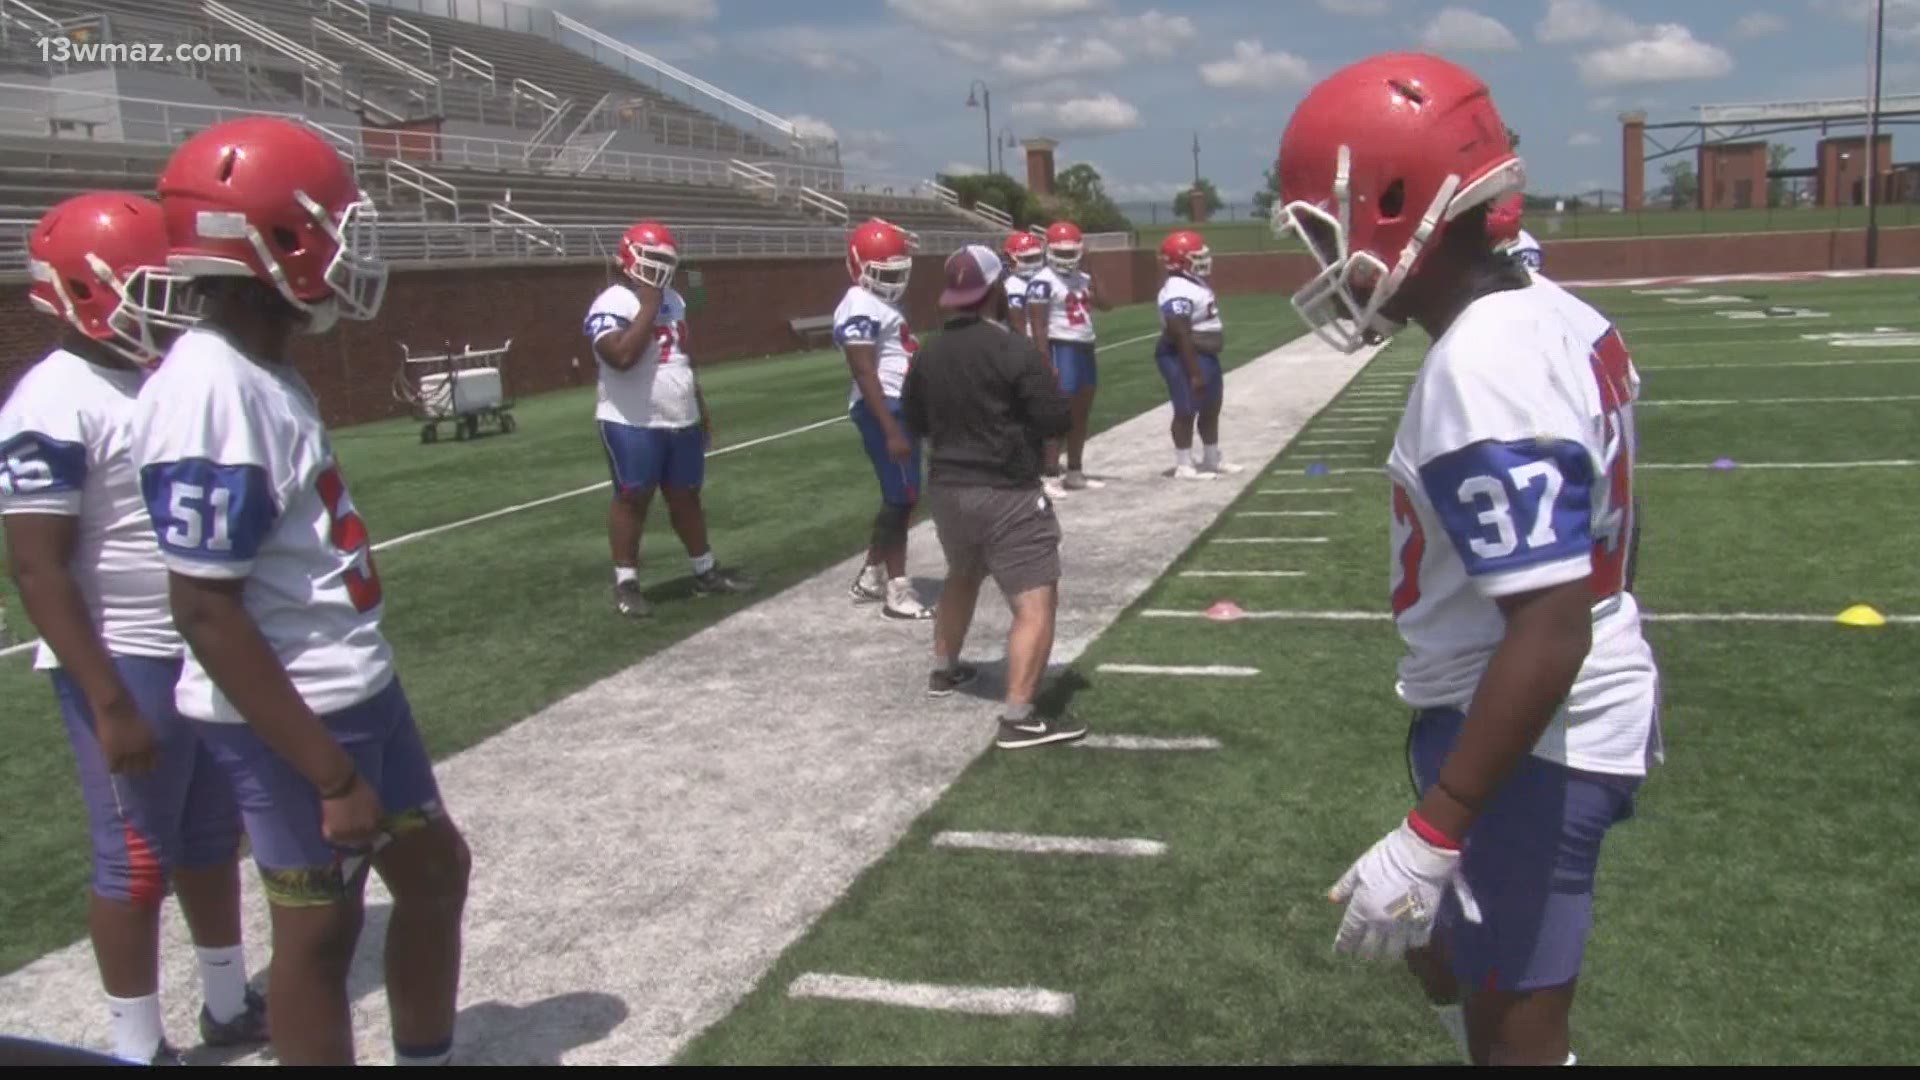 Offensive linemen at Freedom Field in Warner Robins are preparing to win games on Football Friday Nights